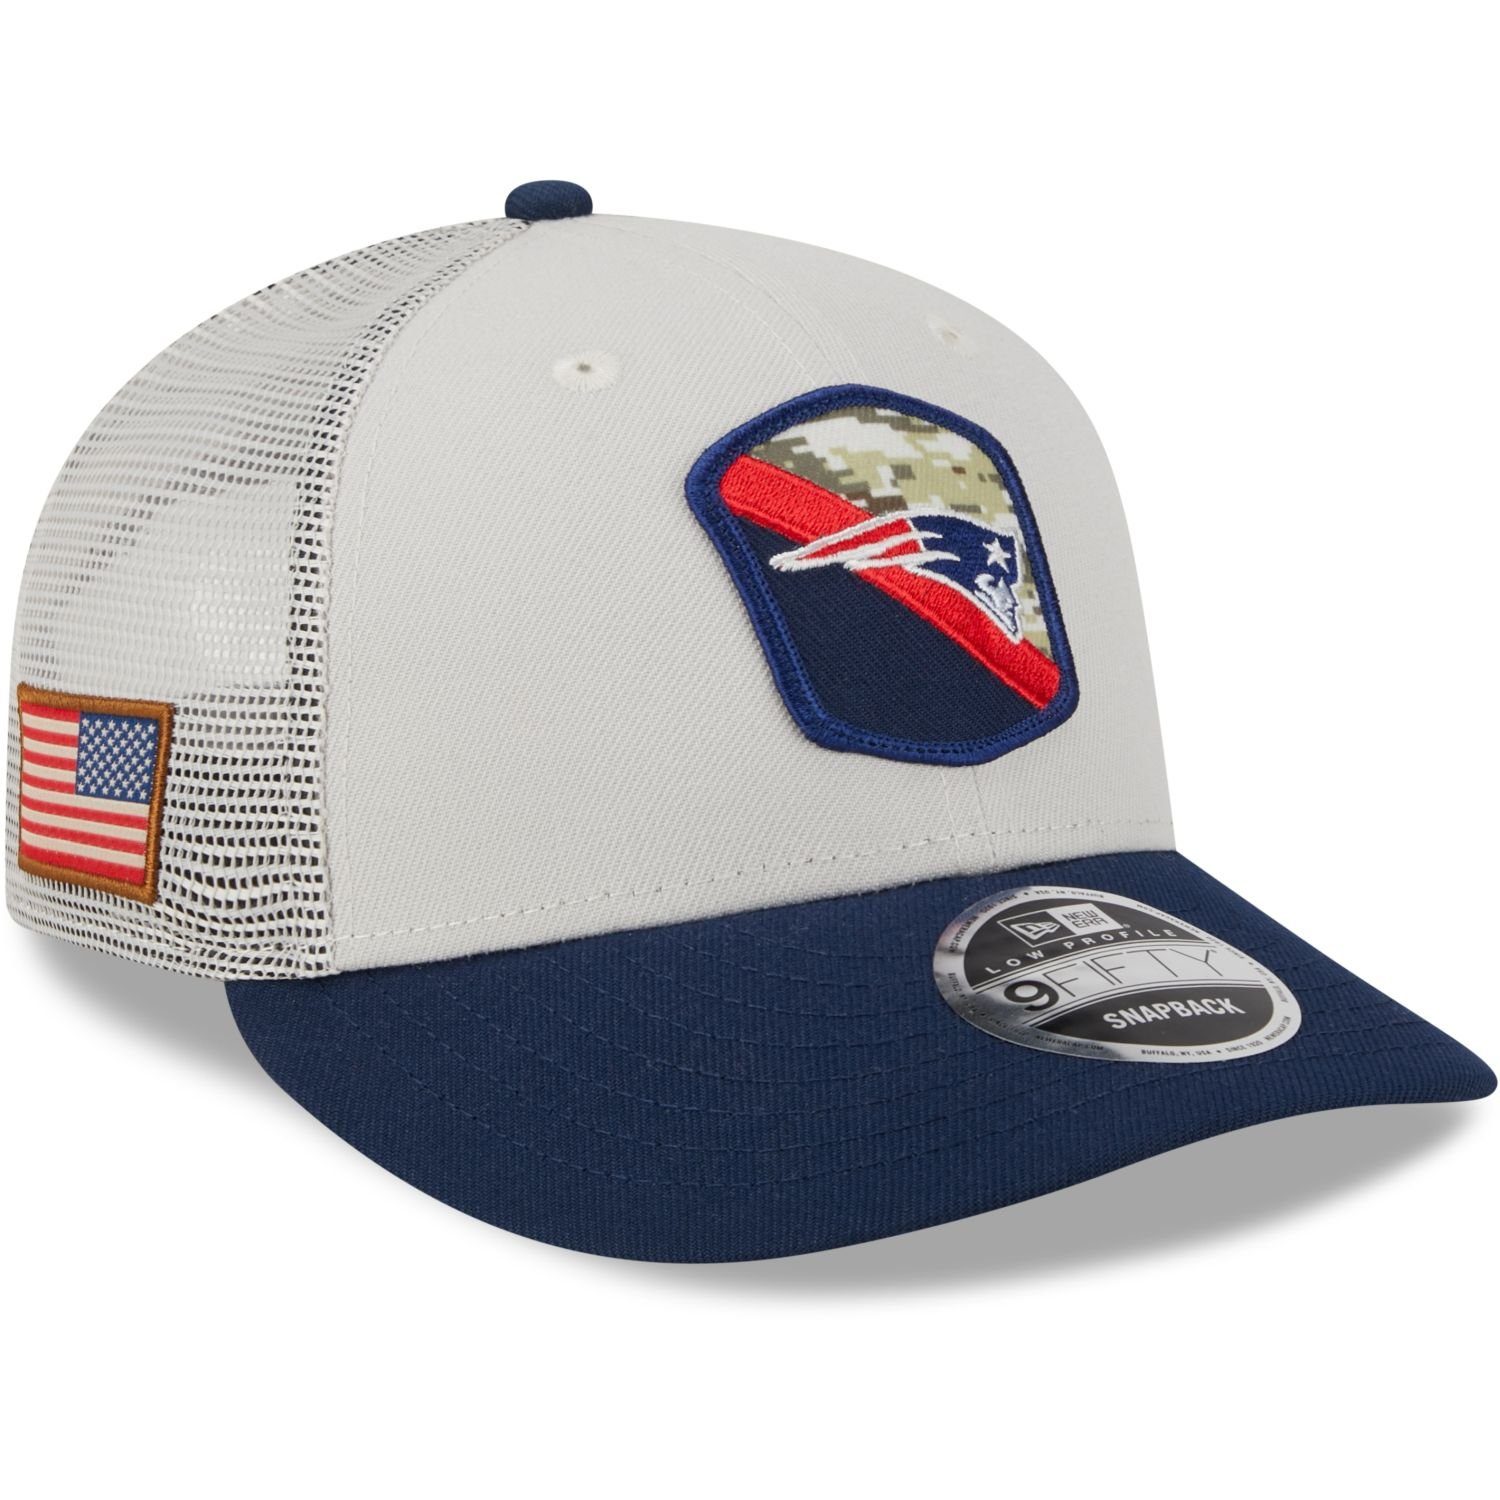 New Era Snapback Cap 9Fifty Low Profile Snap NFL Salute to Service New England Patriots